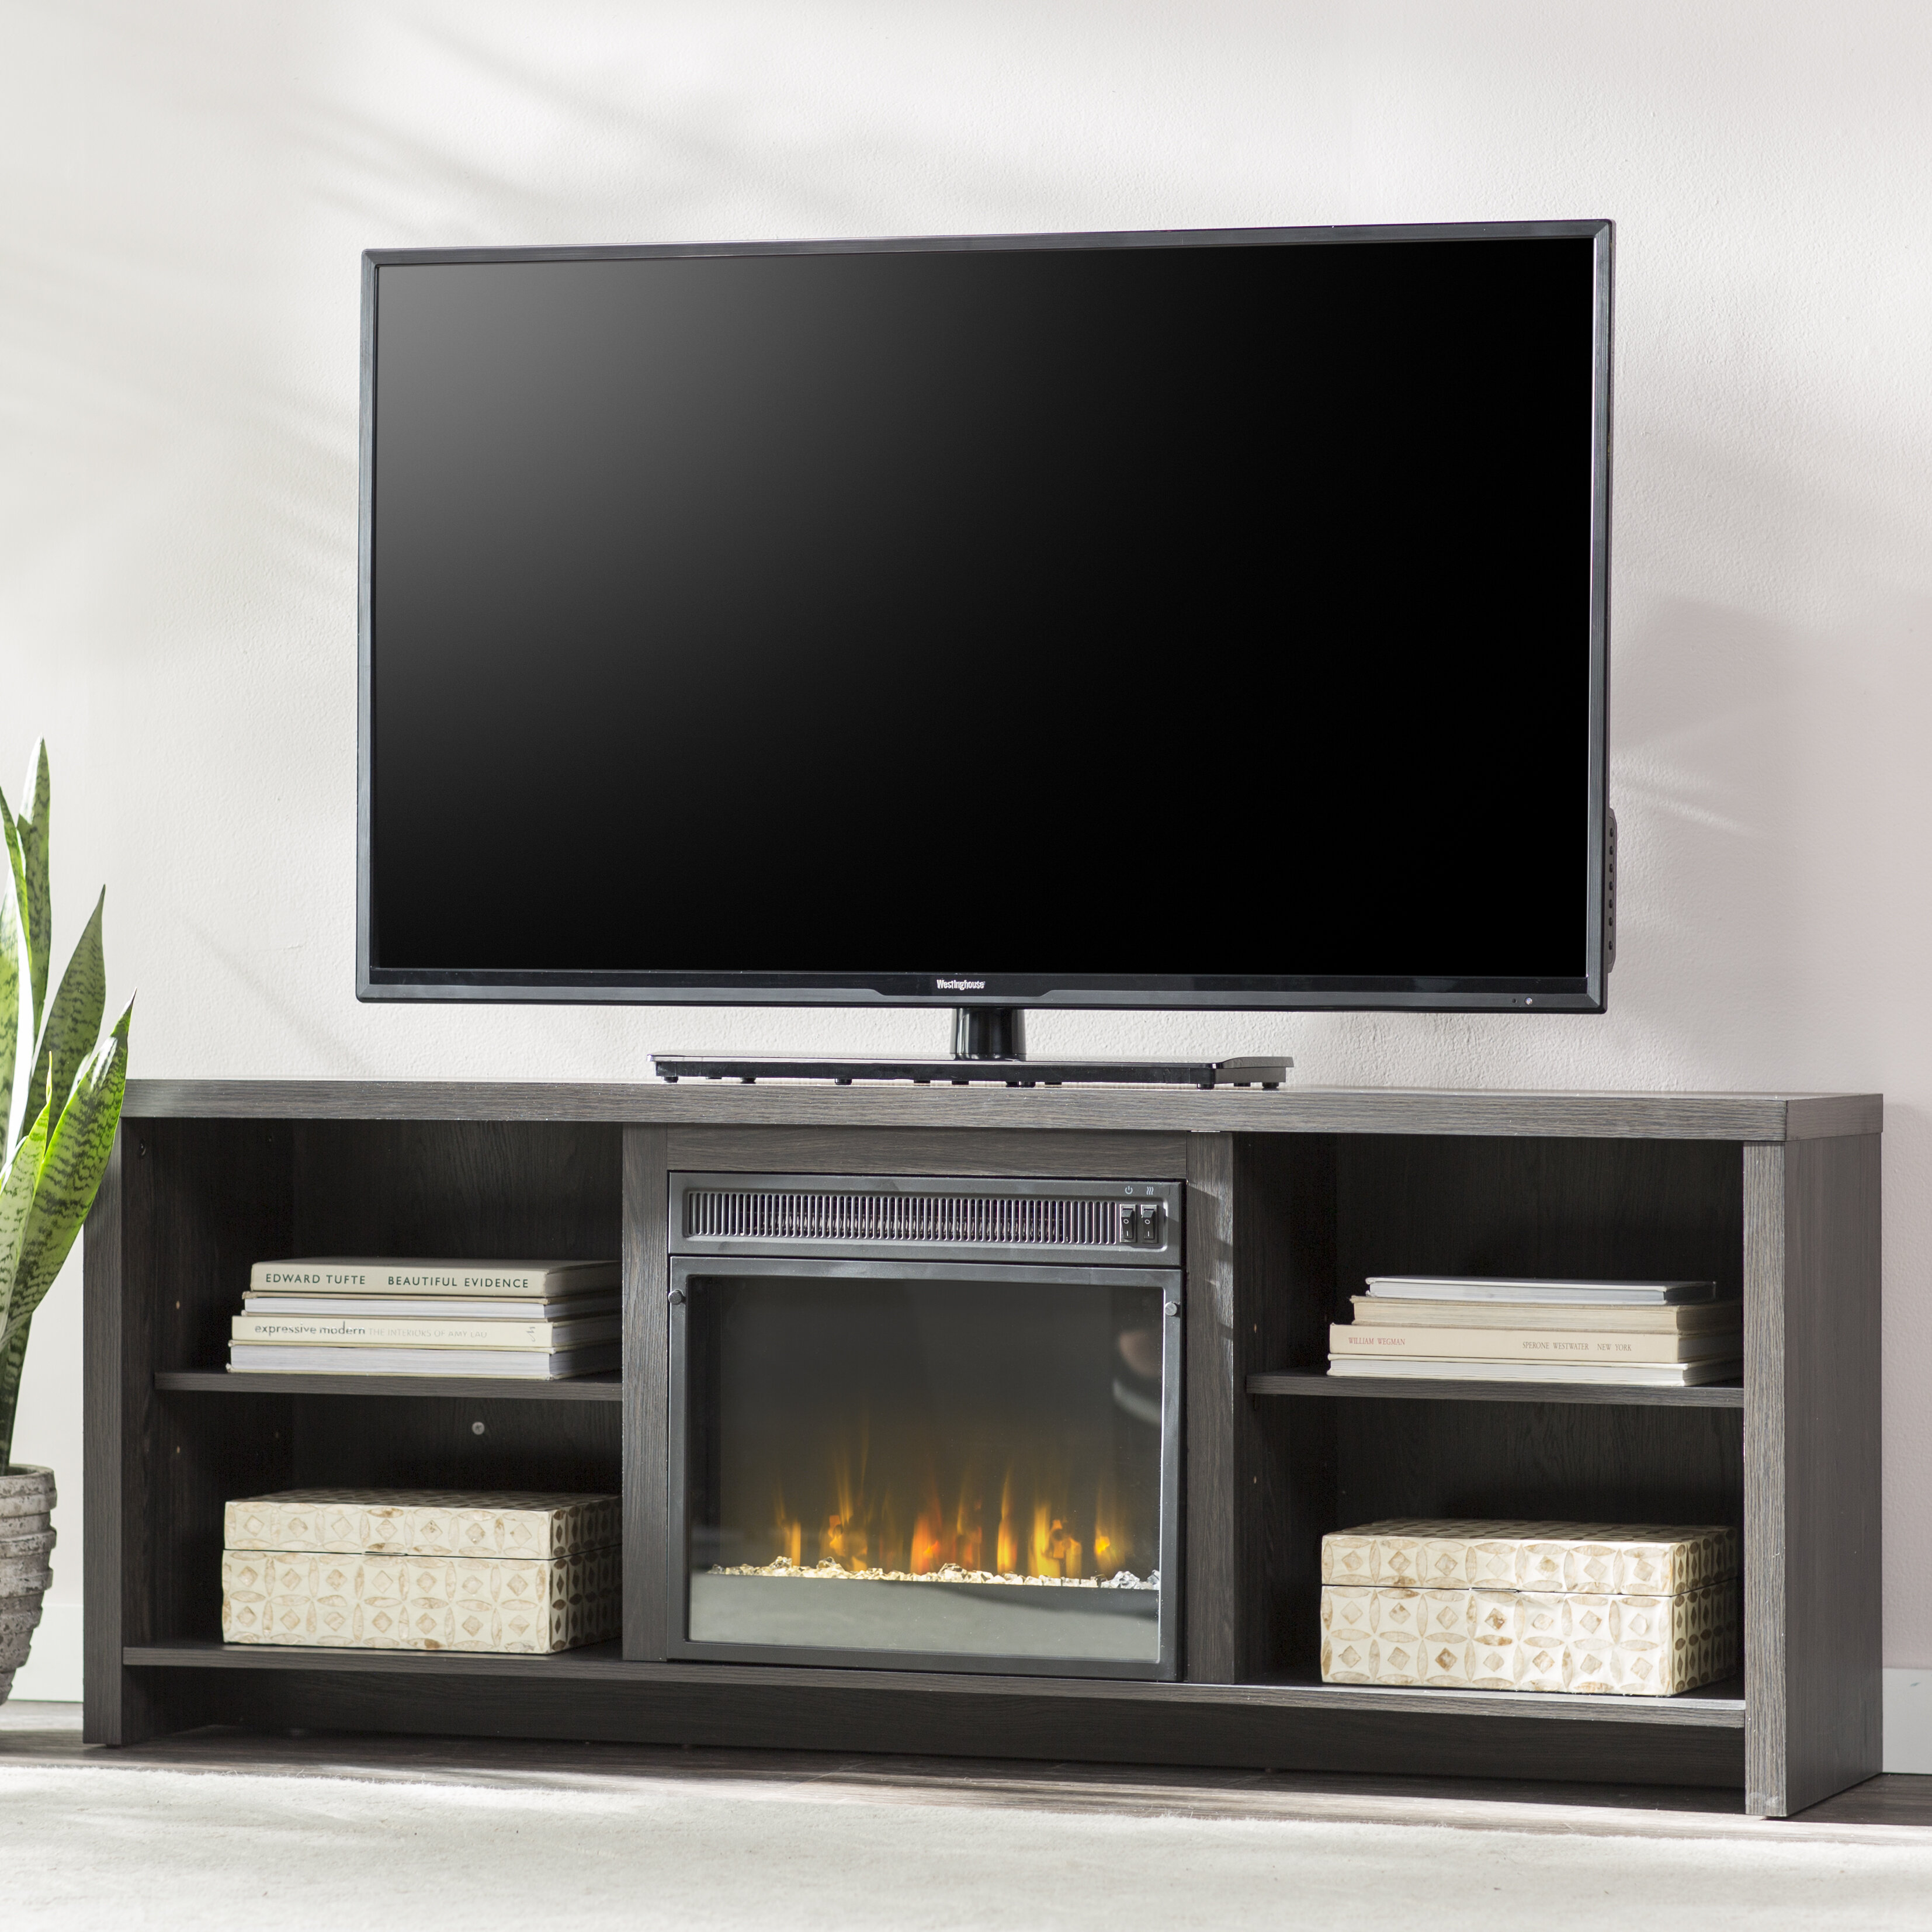 65 In Tv Stand with Fireplace Inspirational Media Fireplace with Remote